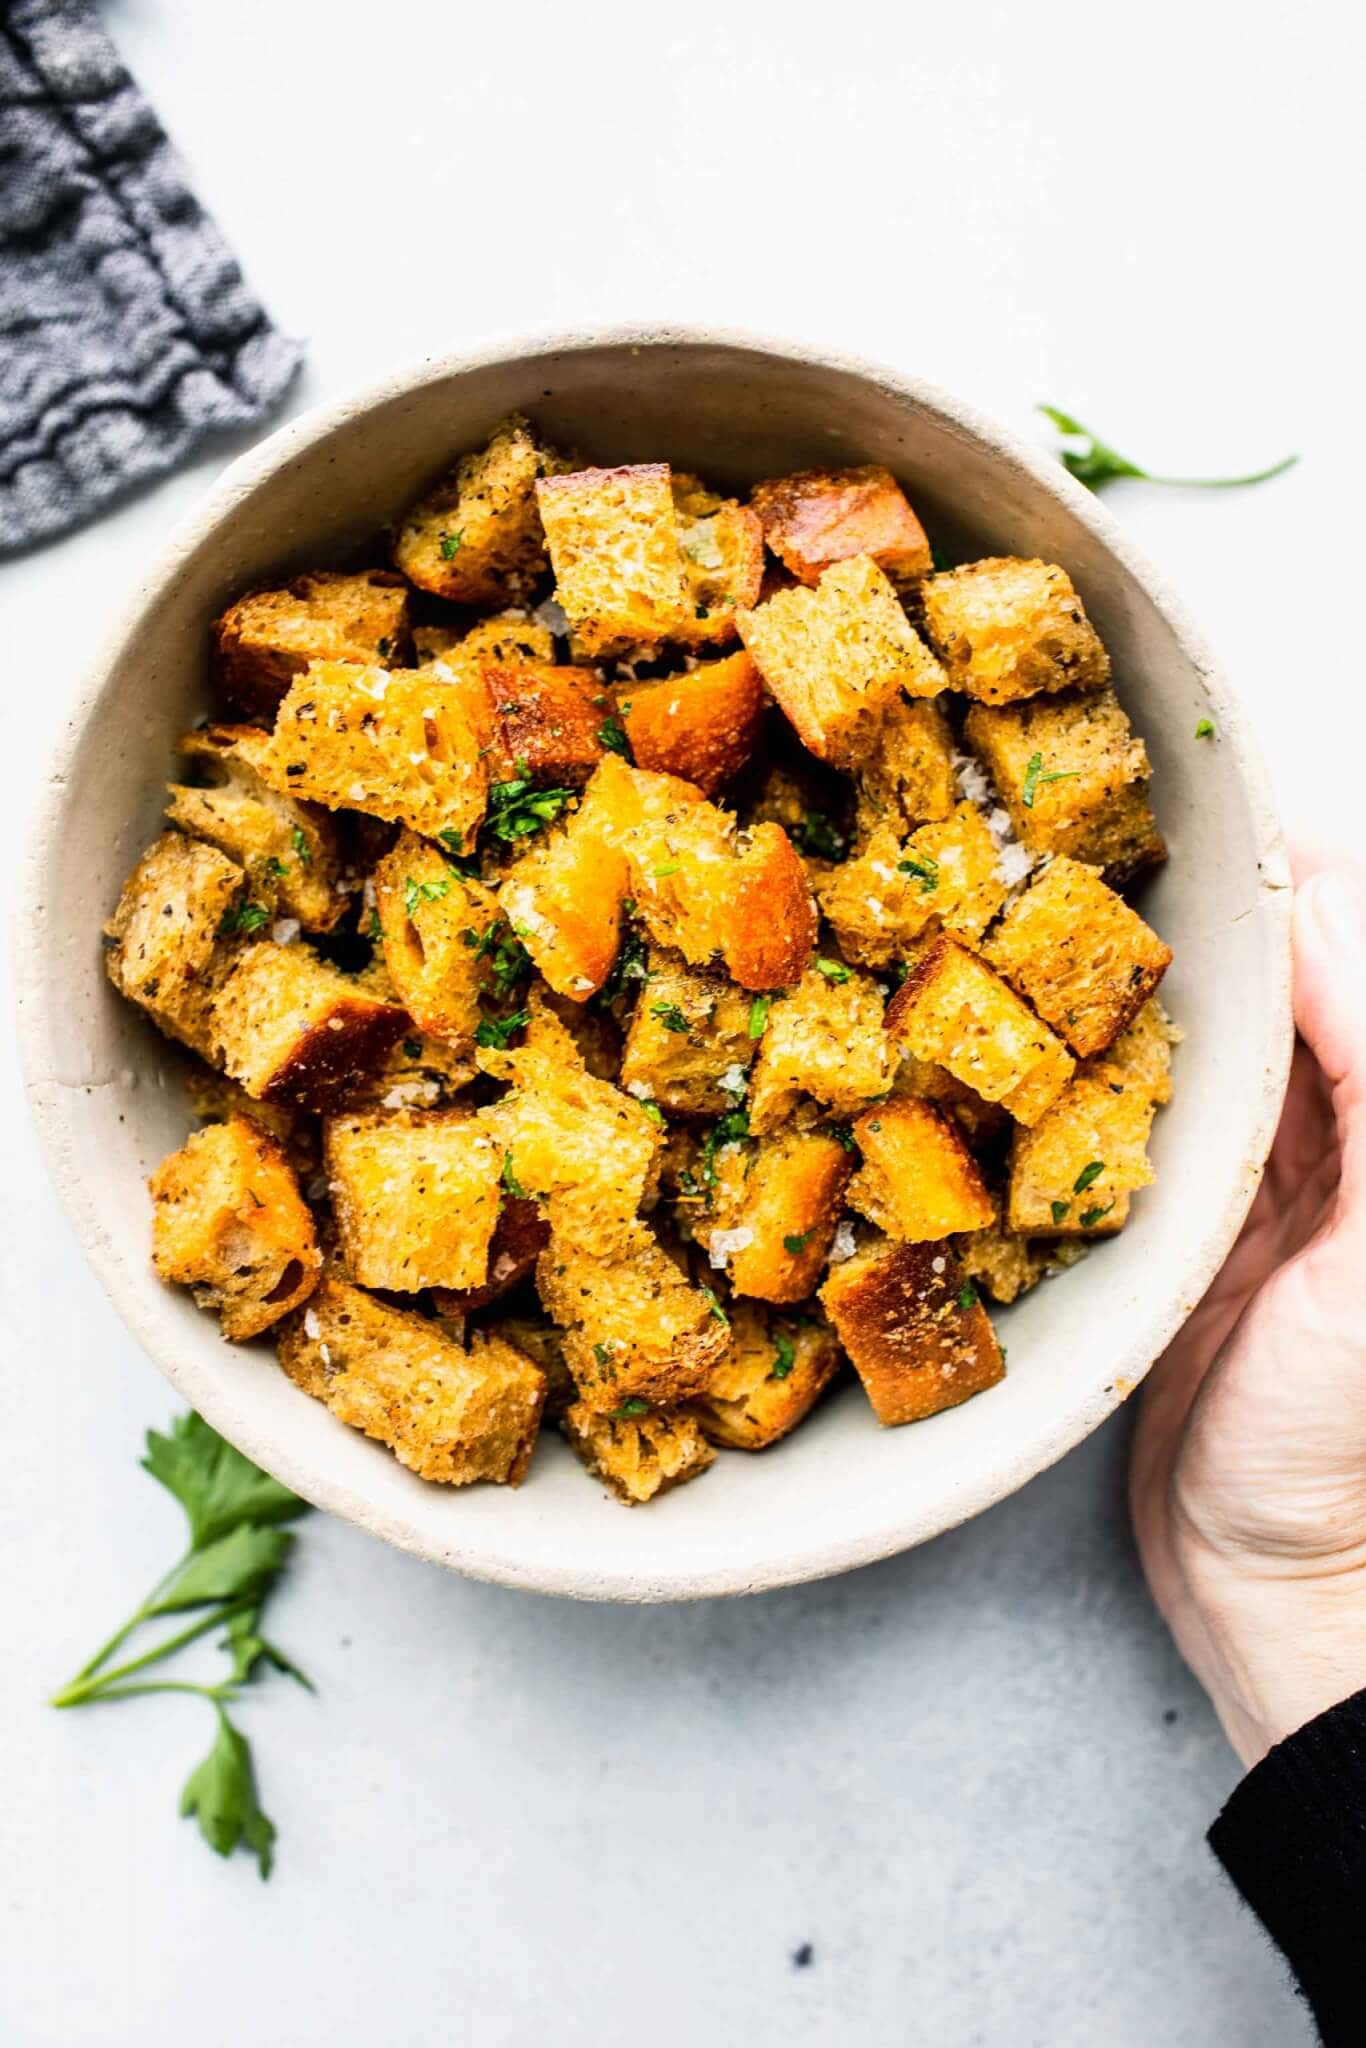 Hand holidng Bowl of croutons sprinkled with parsley. Bowl of croutons sprinkled with parsley.